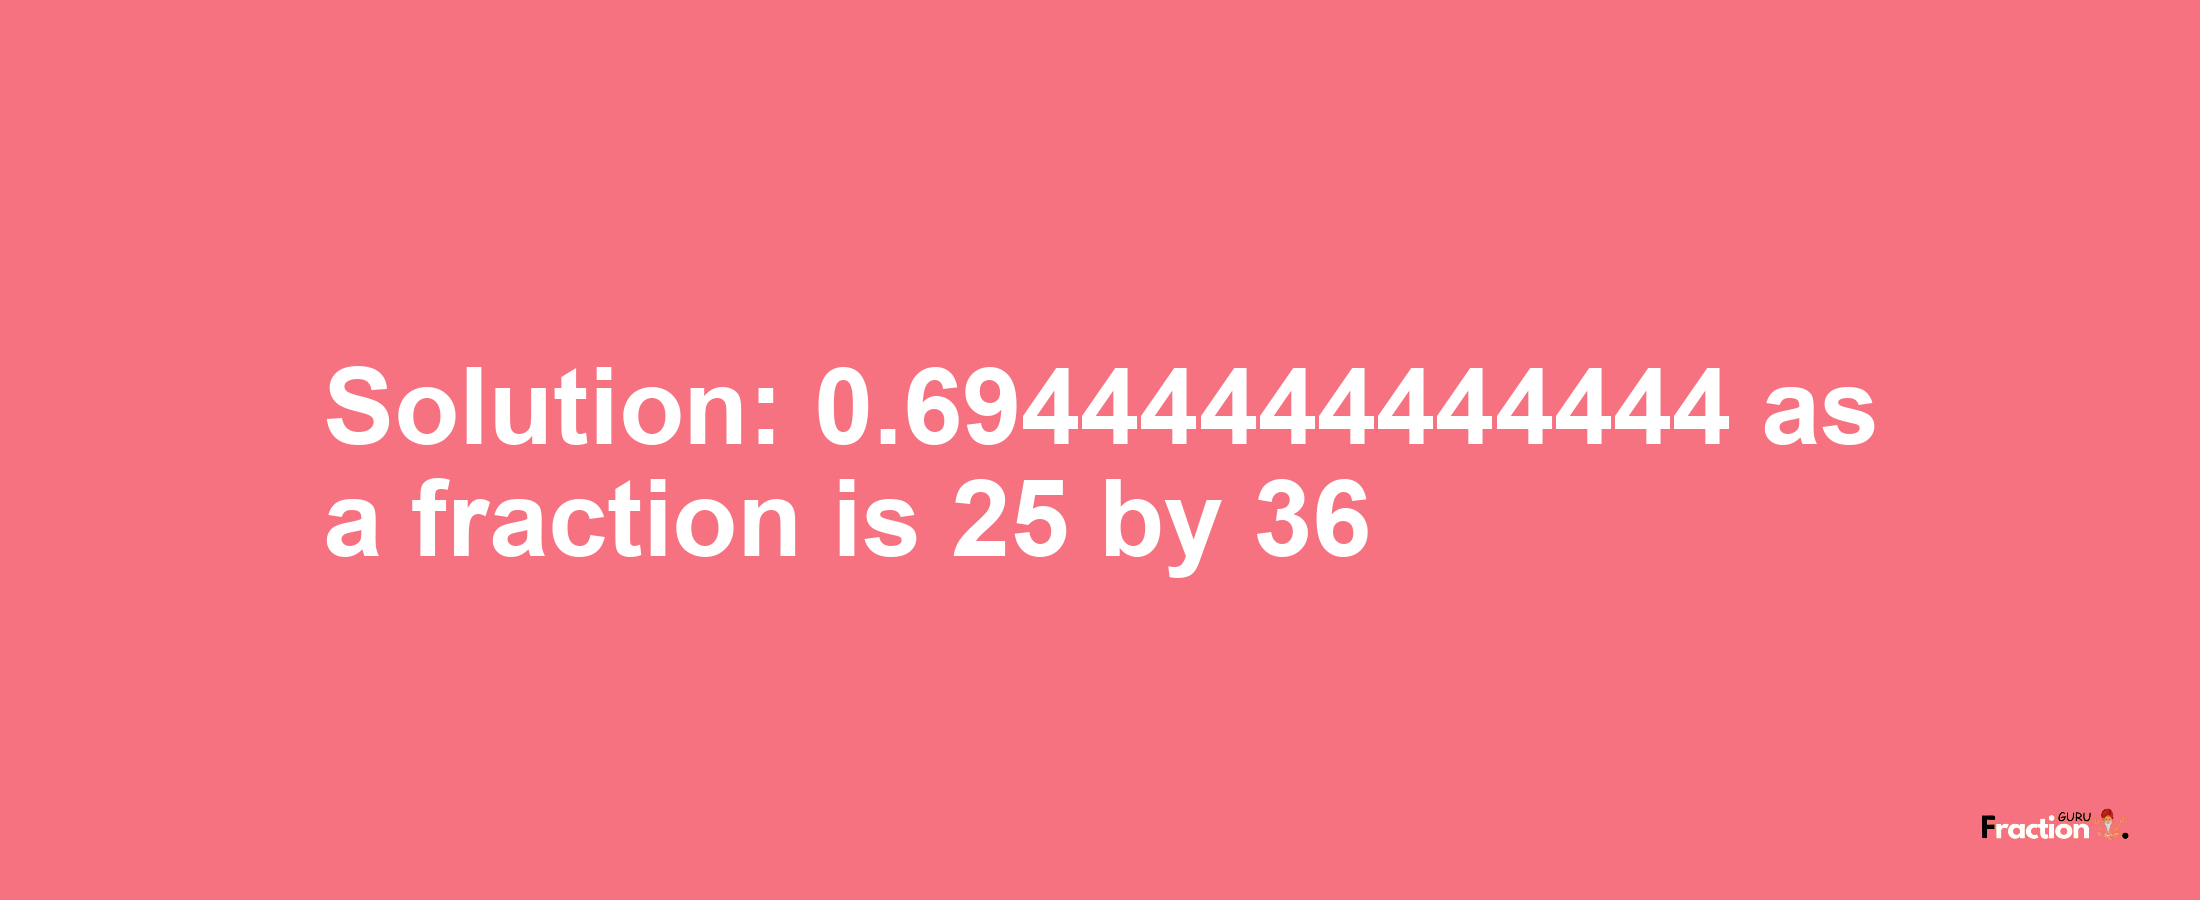 Solution:0.69444444444444 as a fraction is 25/36